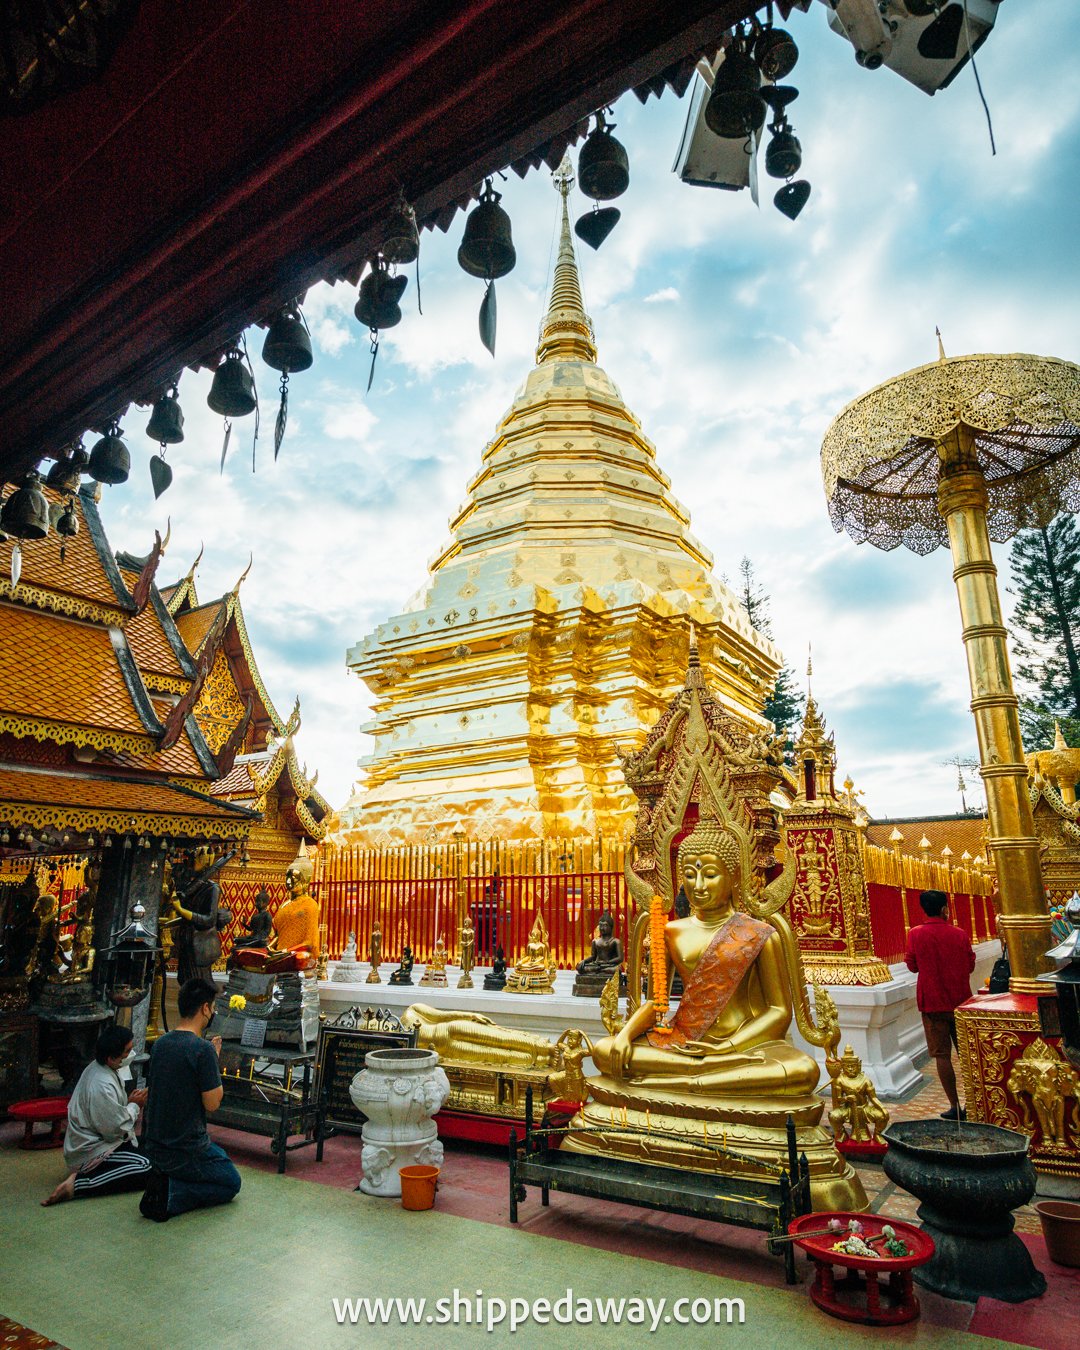 top things to do in Chiang Mai, Chiang Mai attractions - golden chedi and beautiful architecture of Wat Phra That Doi Suthep temple